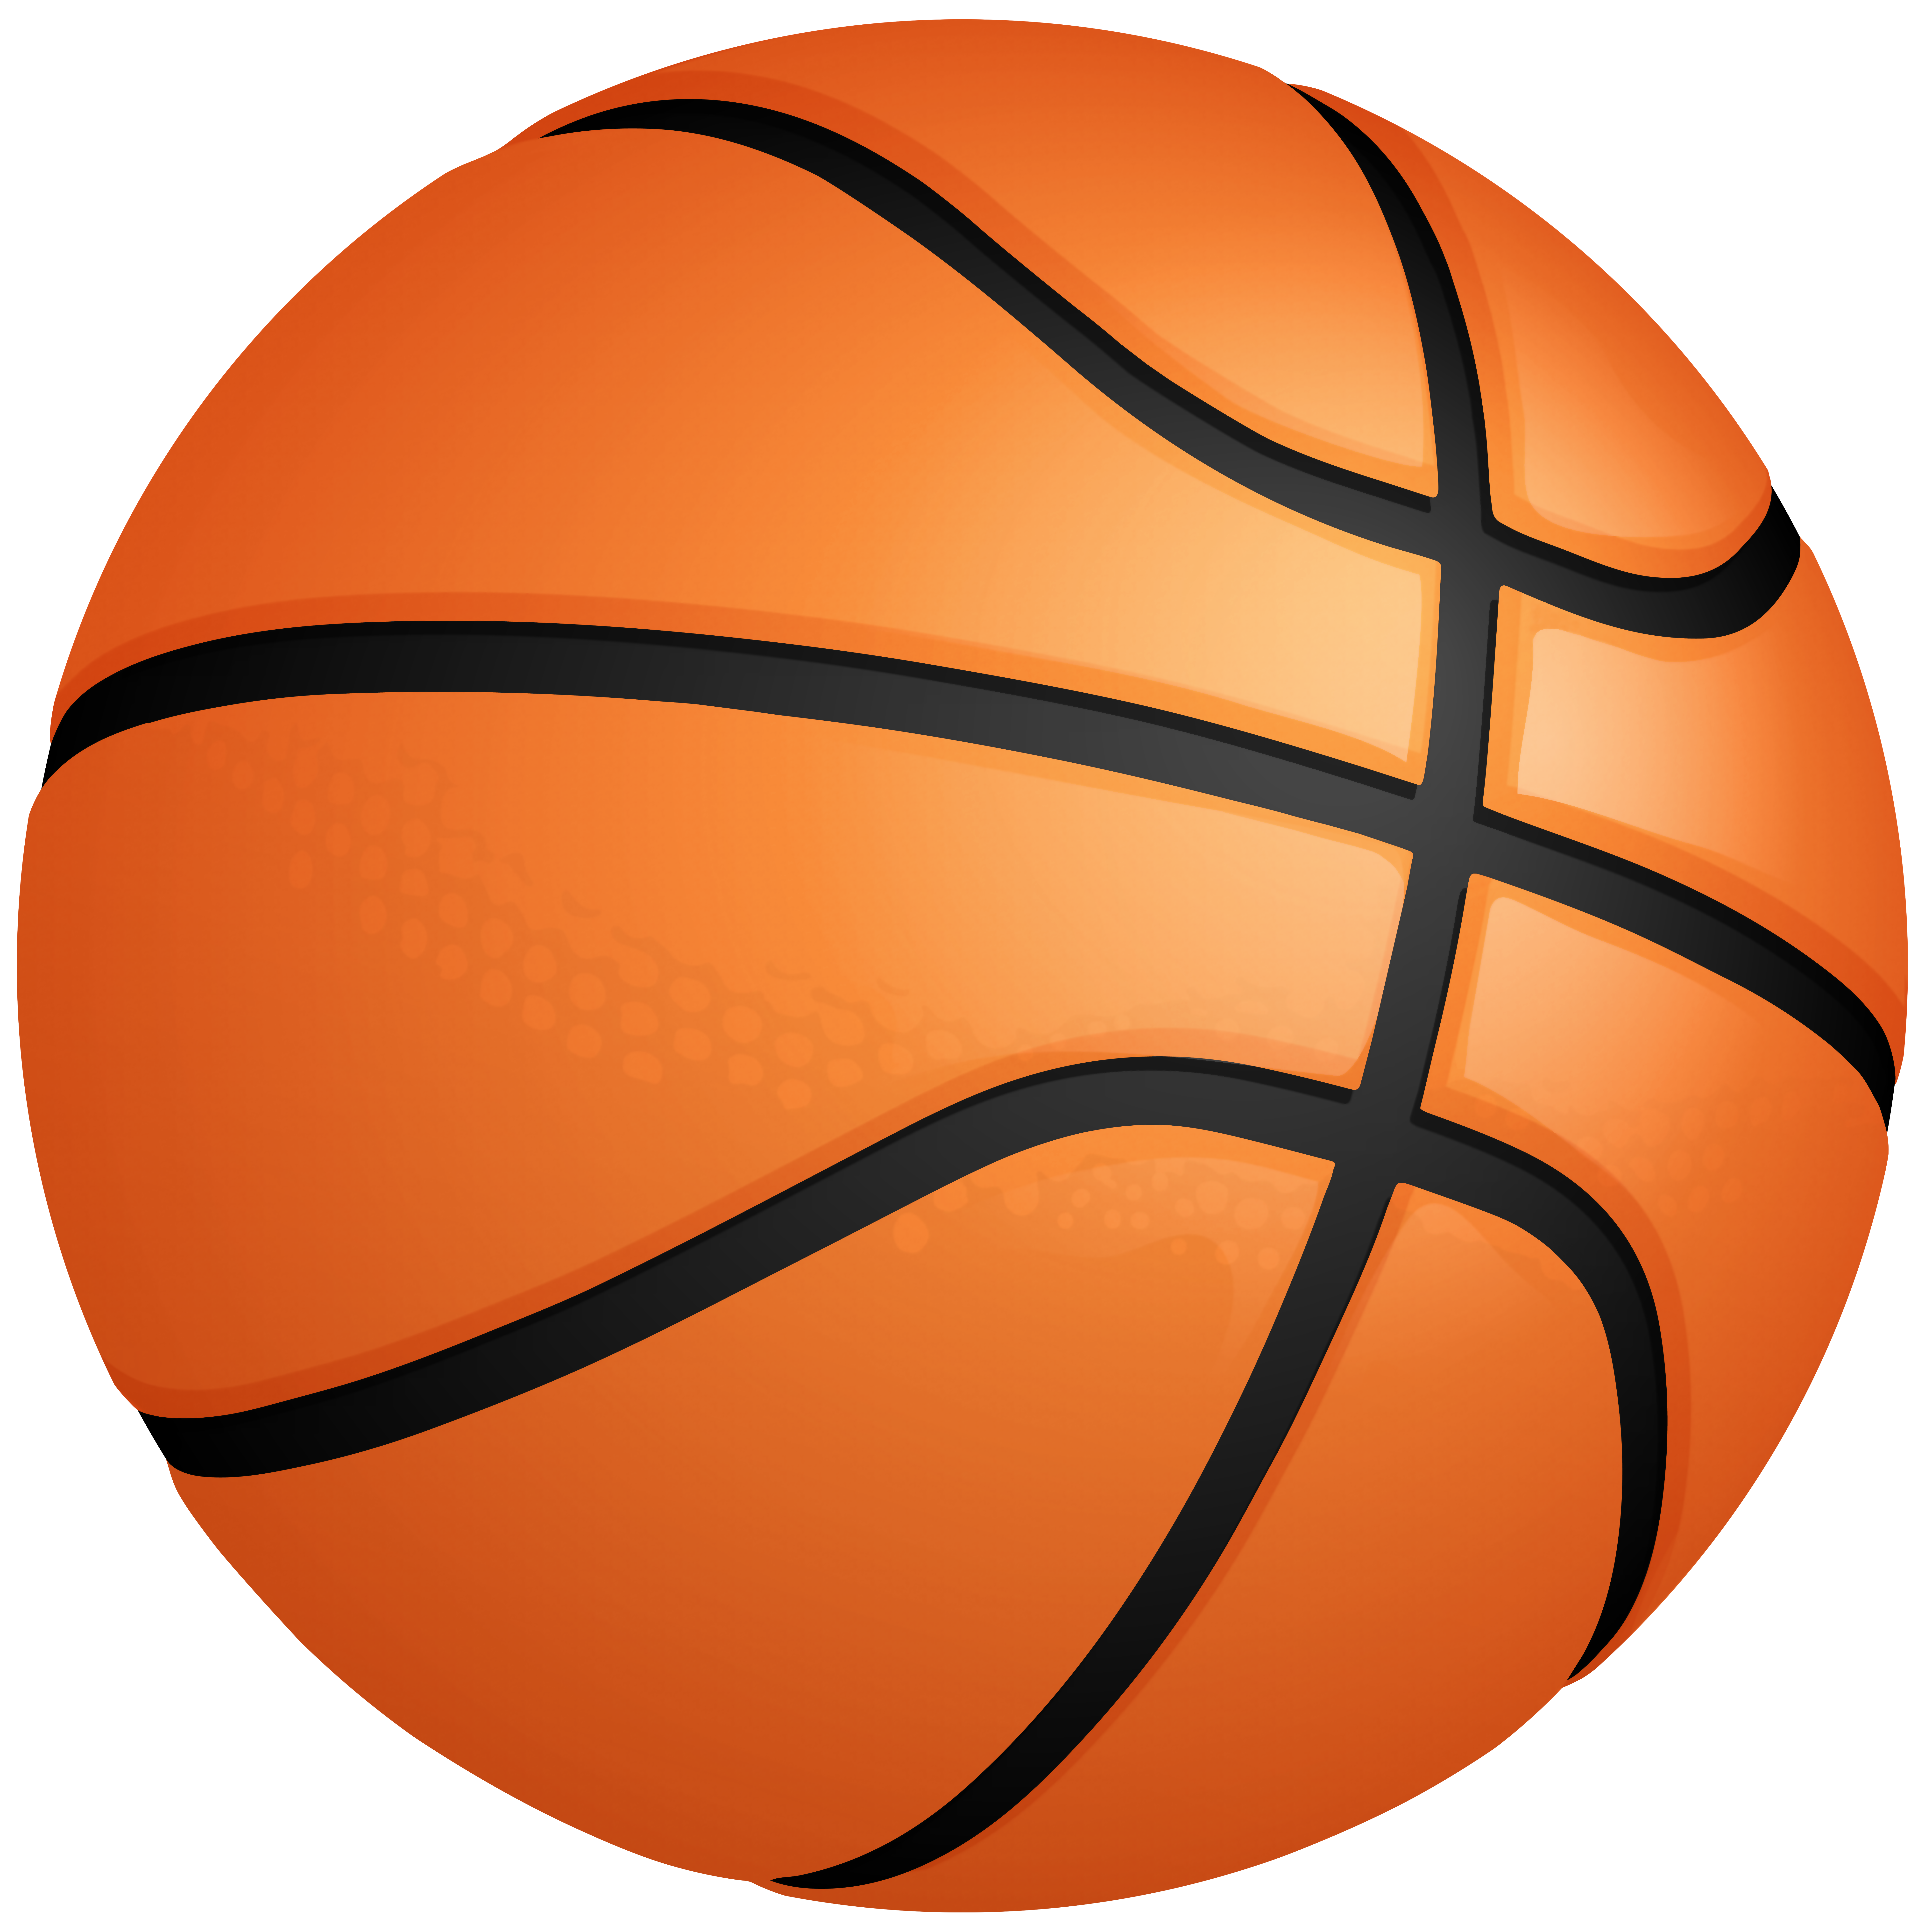 https://gallery.yopriceville.com/var/albums/Free-Clipart-Pictures/Sport-PNG/Basketball_PNG_Transparent_Clipart.png?m=1647596989